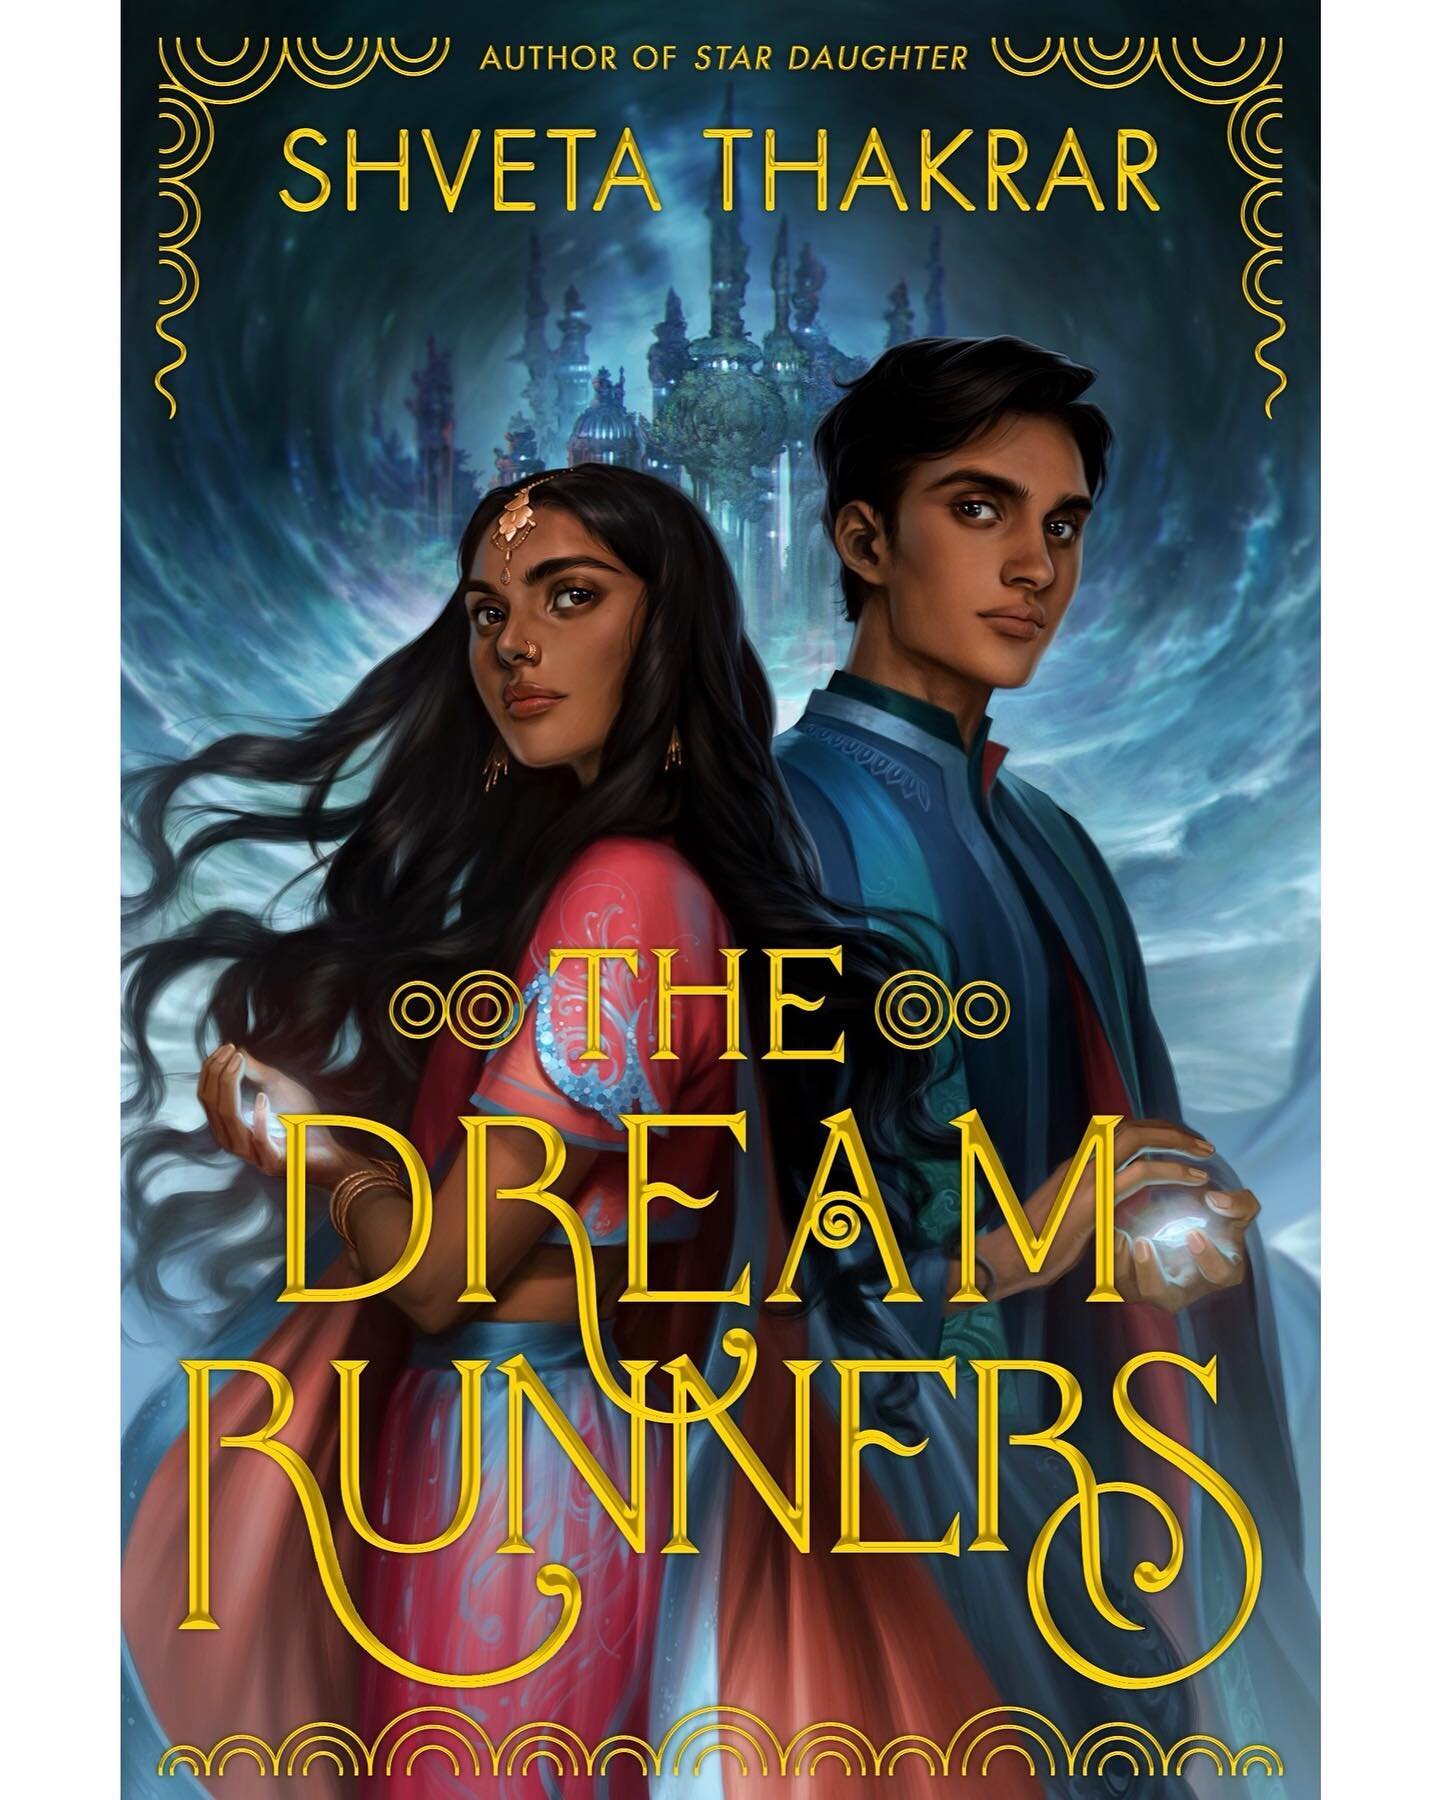 Book title and cover reveal time!!! (And it&rsquo;s STAR DAUGHTER&rsquo;s one-year anniversary, too.)

Everyone, get ready for THE DREAM RUNNERS (another standalone!), out 28 June 2022! (Gorgeous art by @charliebowater; amazing design by Corina Lupp.